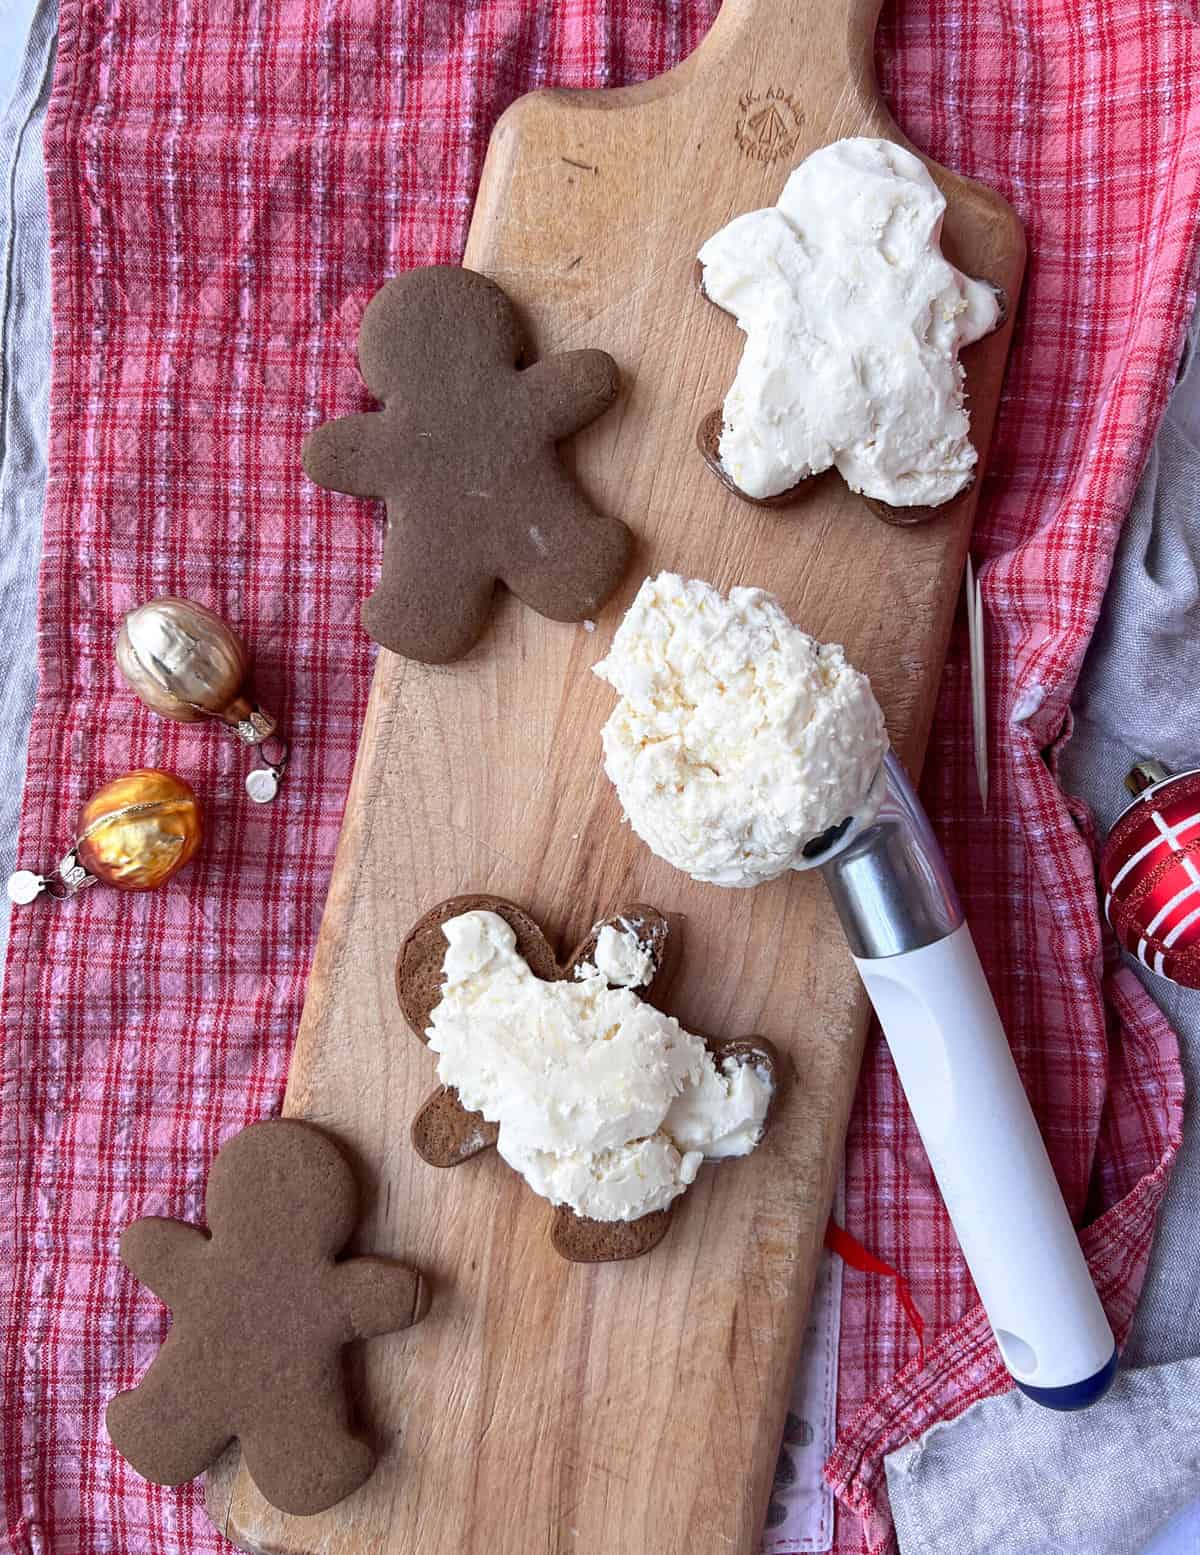 Gingerbread boy cookies with an ice cream scoop full of ice cream.